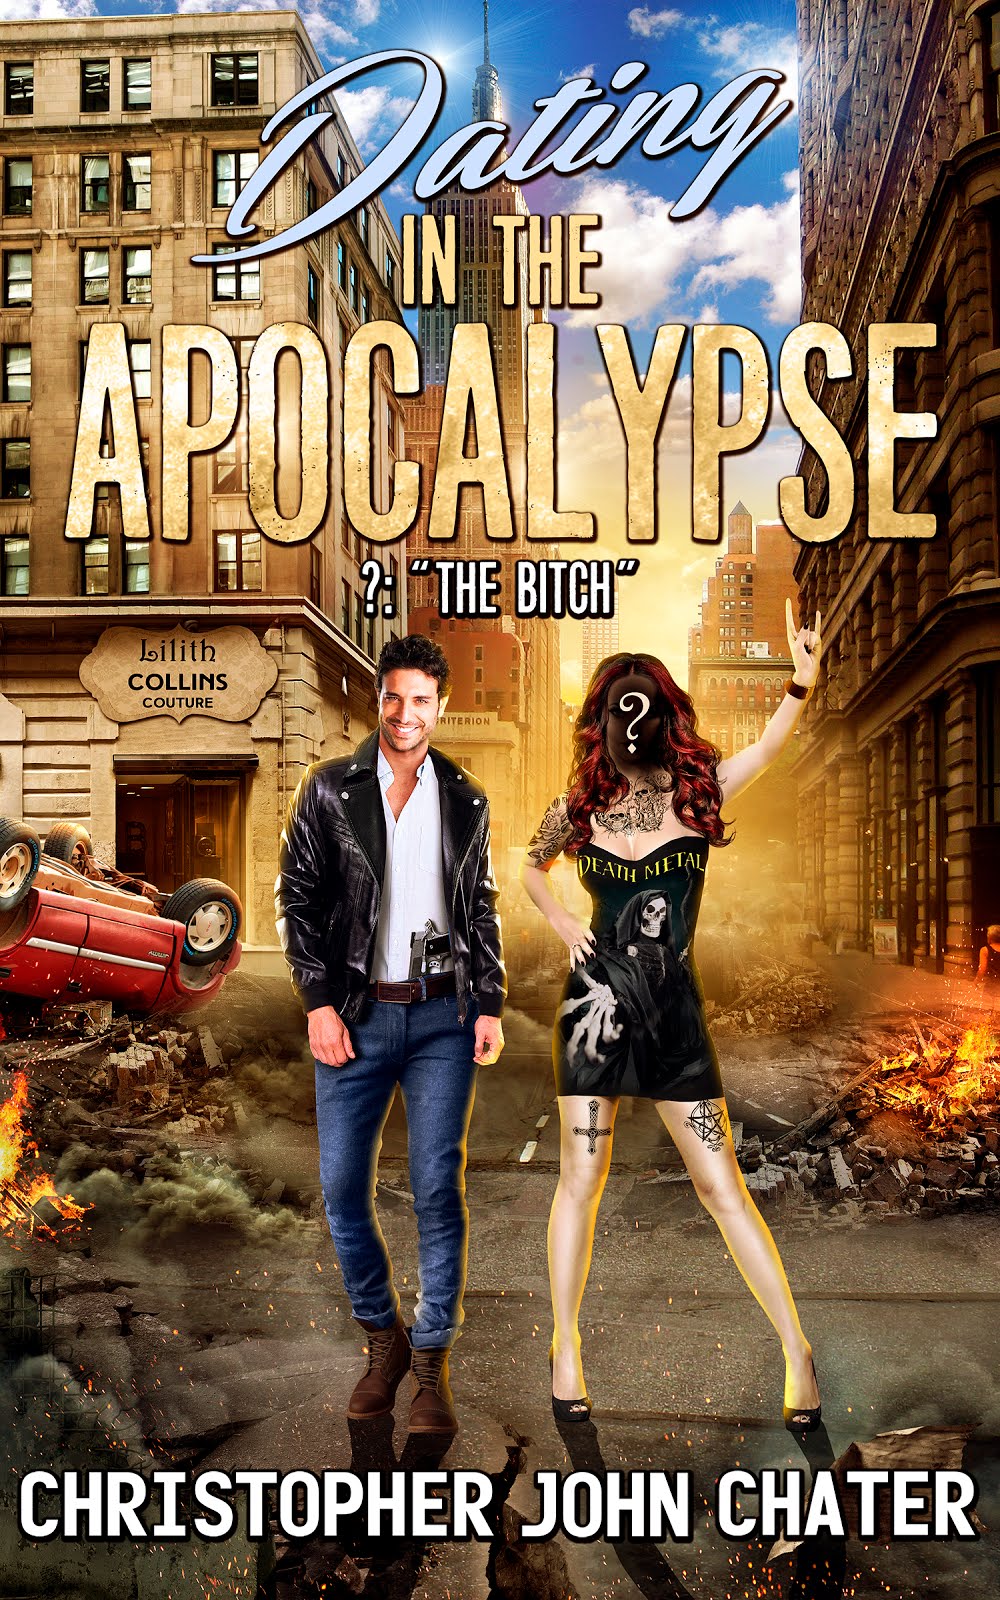 Dating in the Apocalypse: ?: "The Bitch"